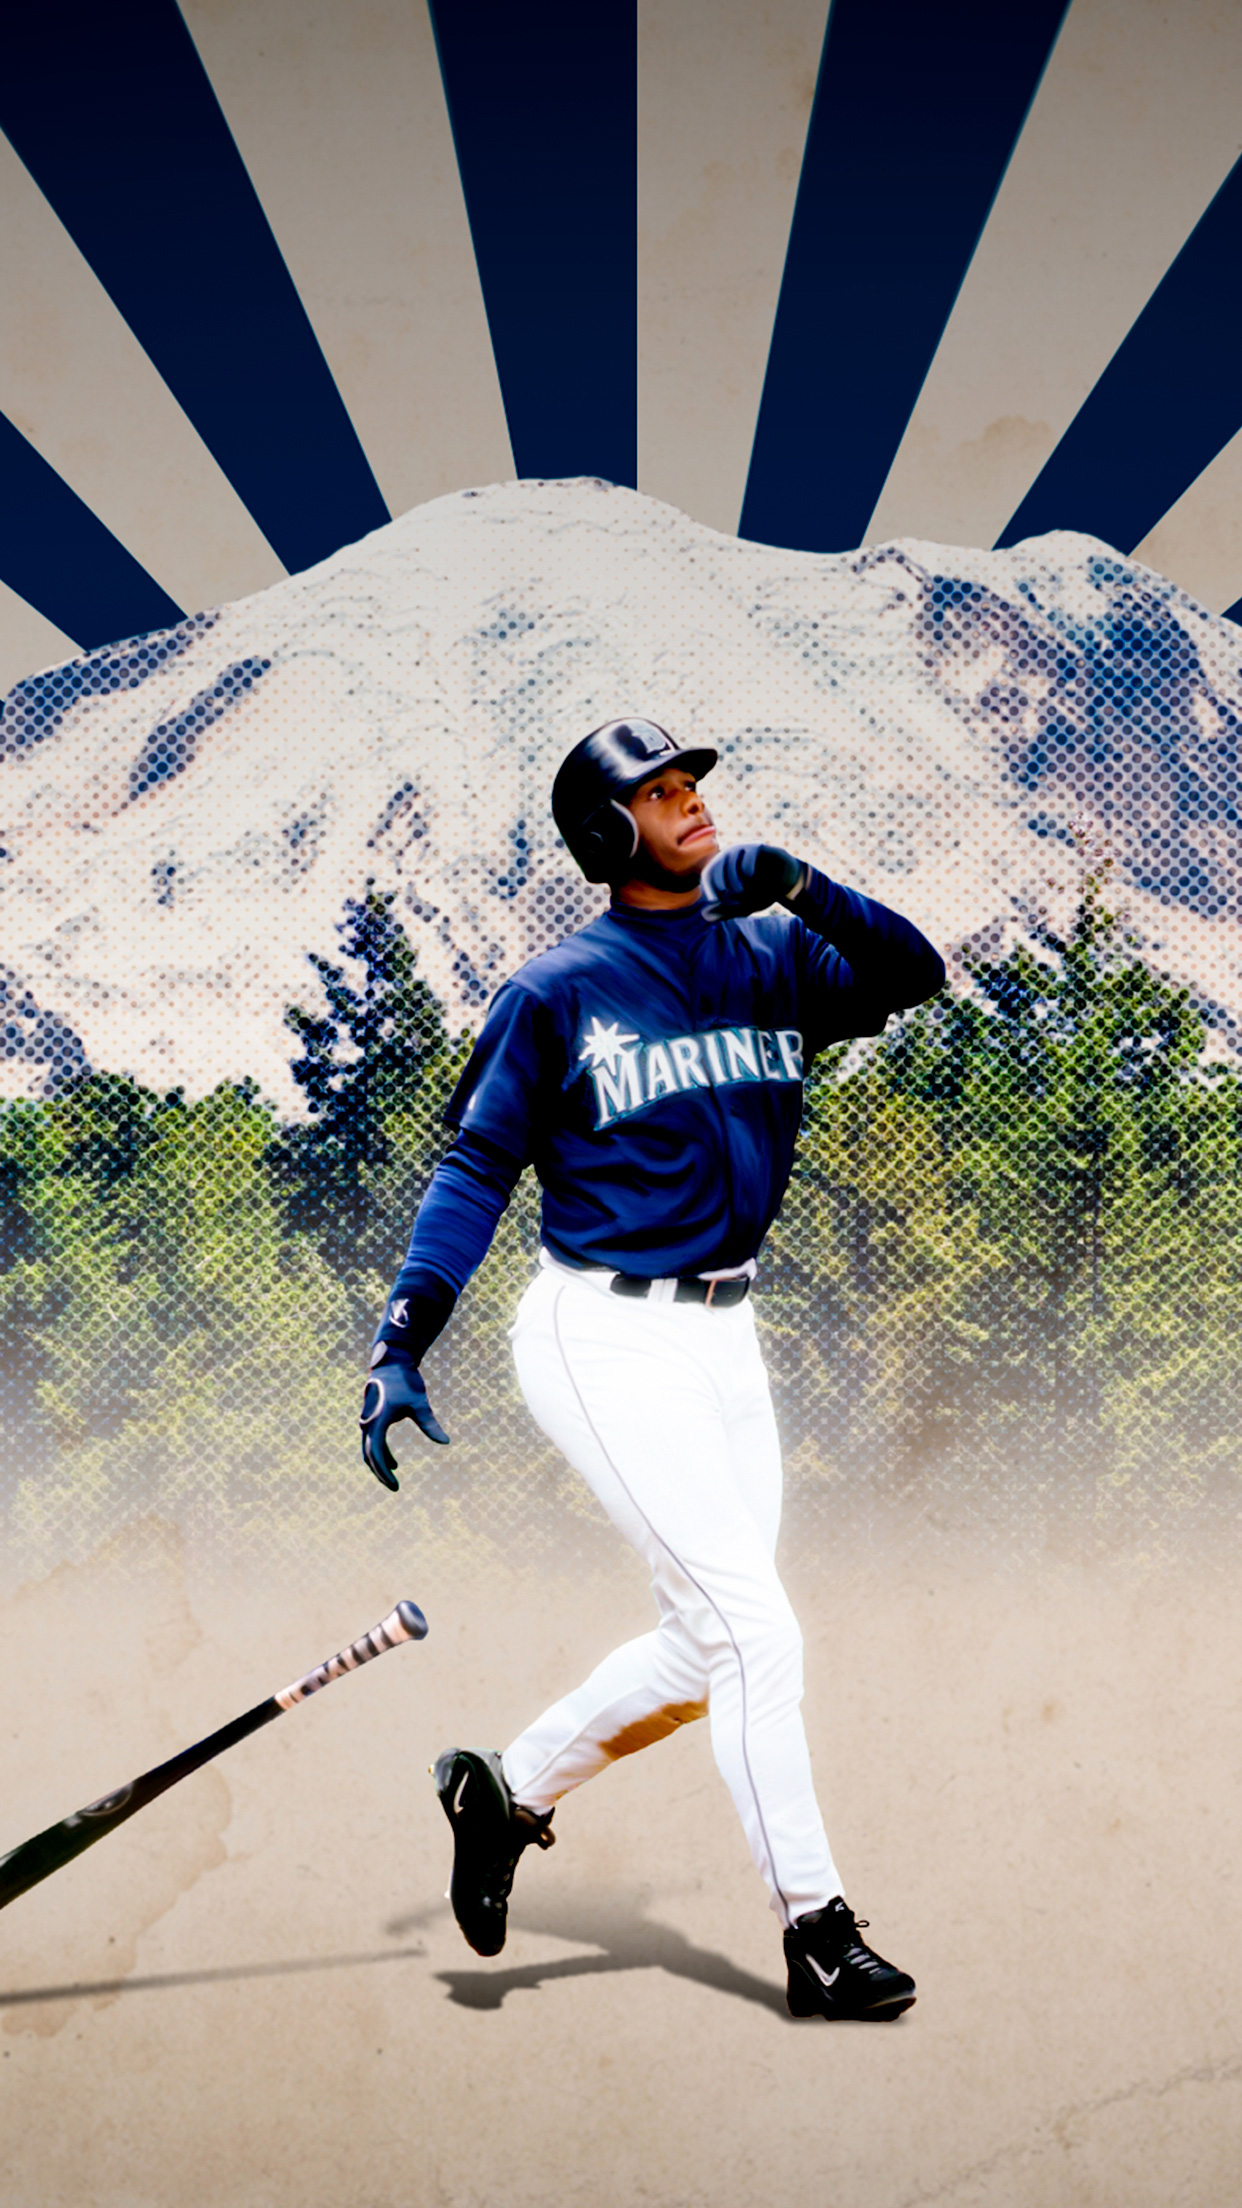 Mariners Players Wallpapers Seattle Mariners